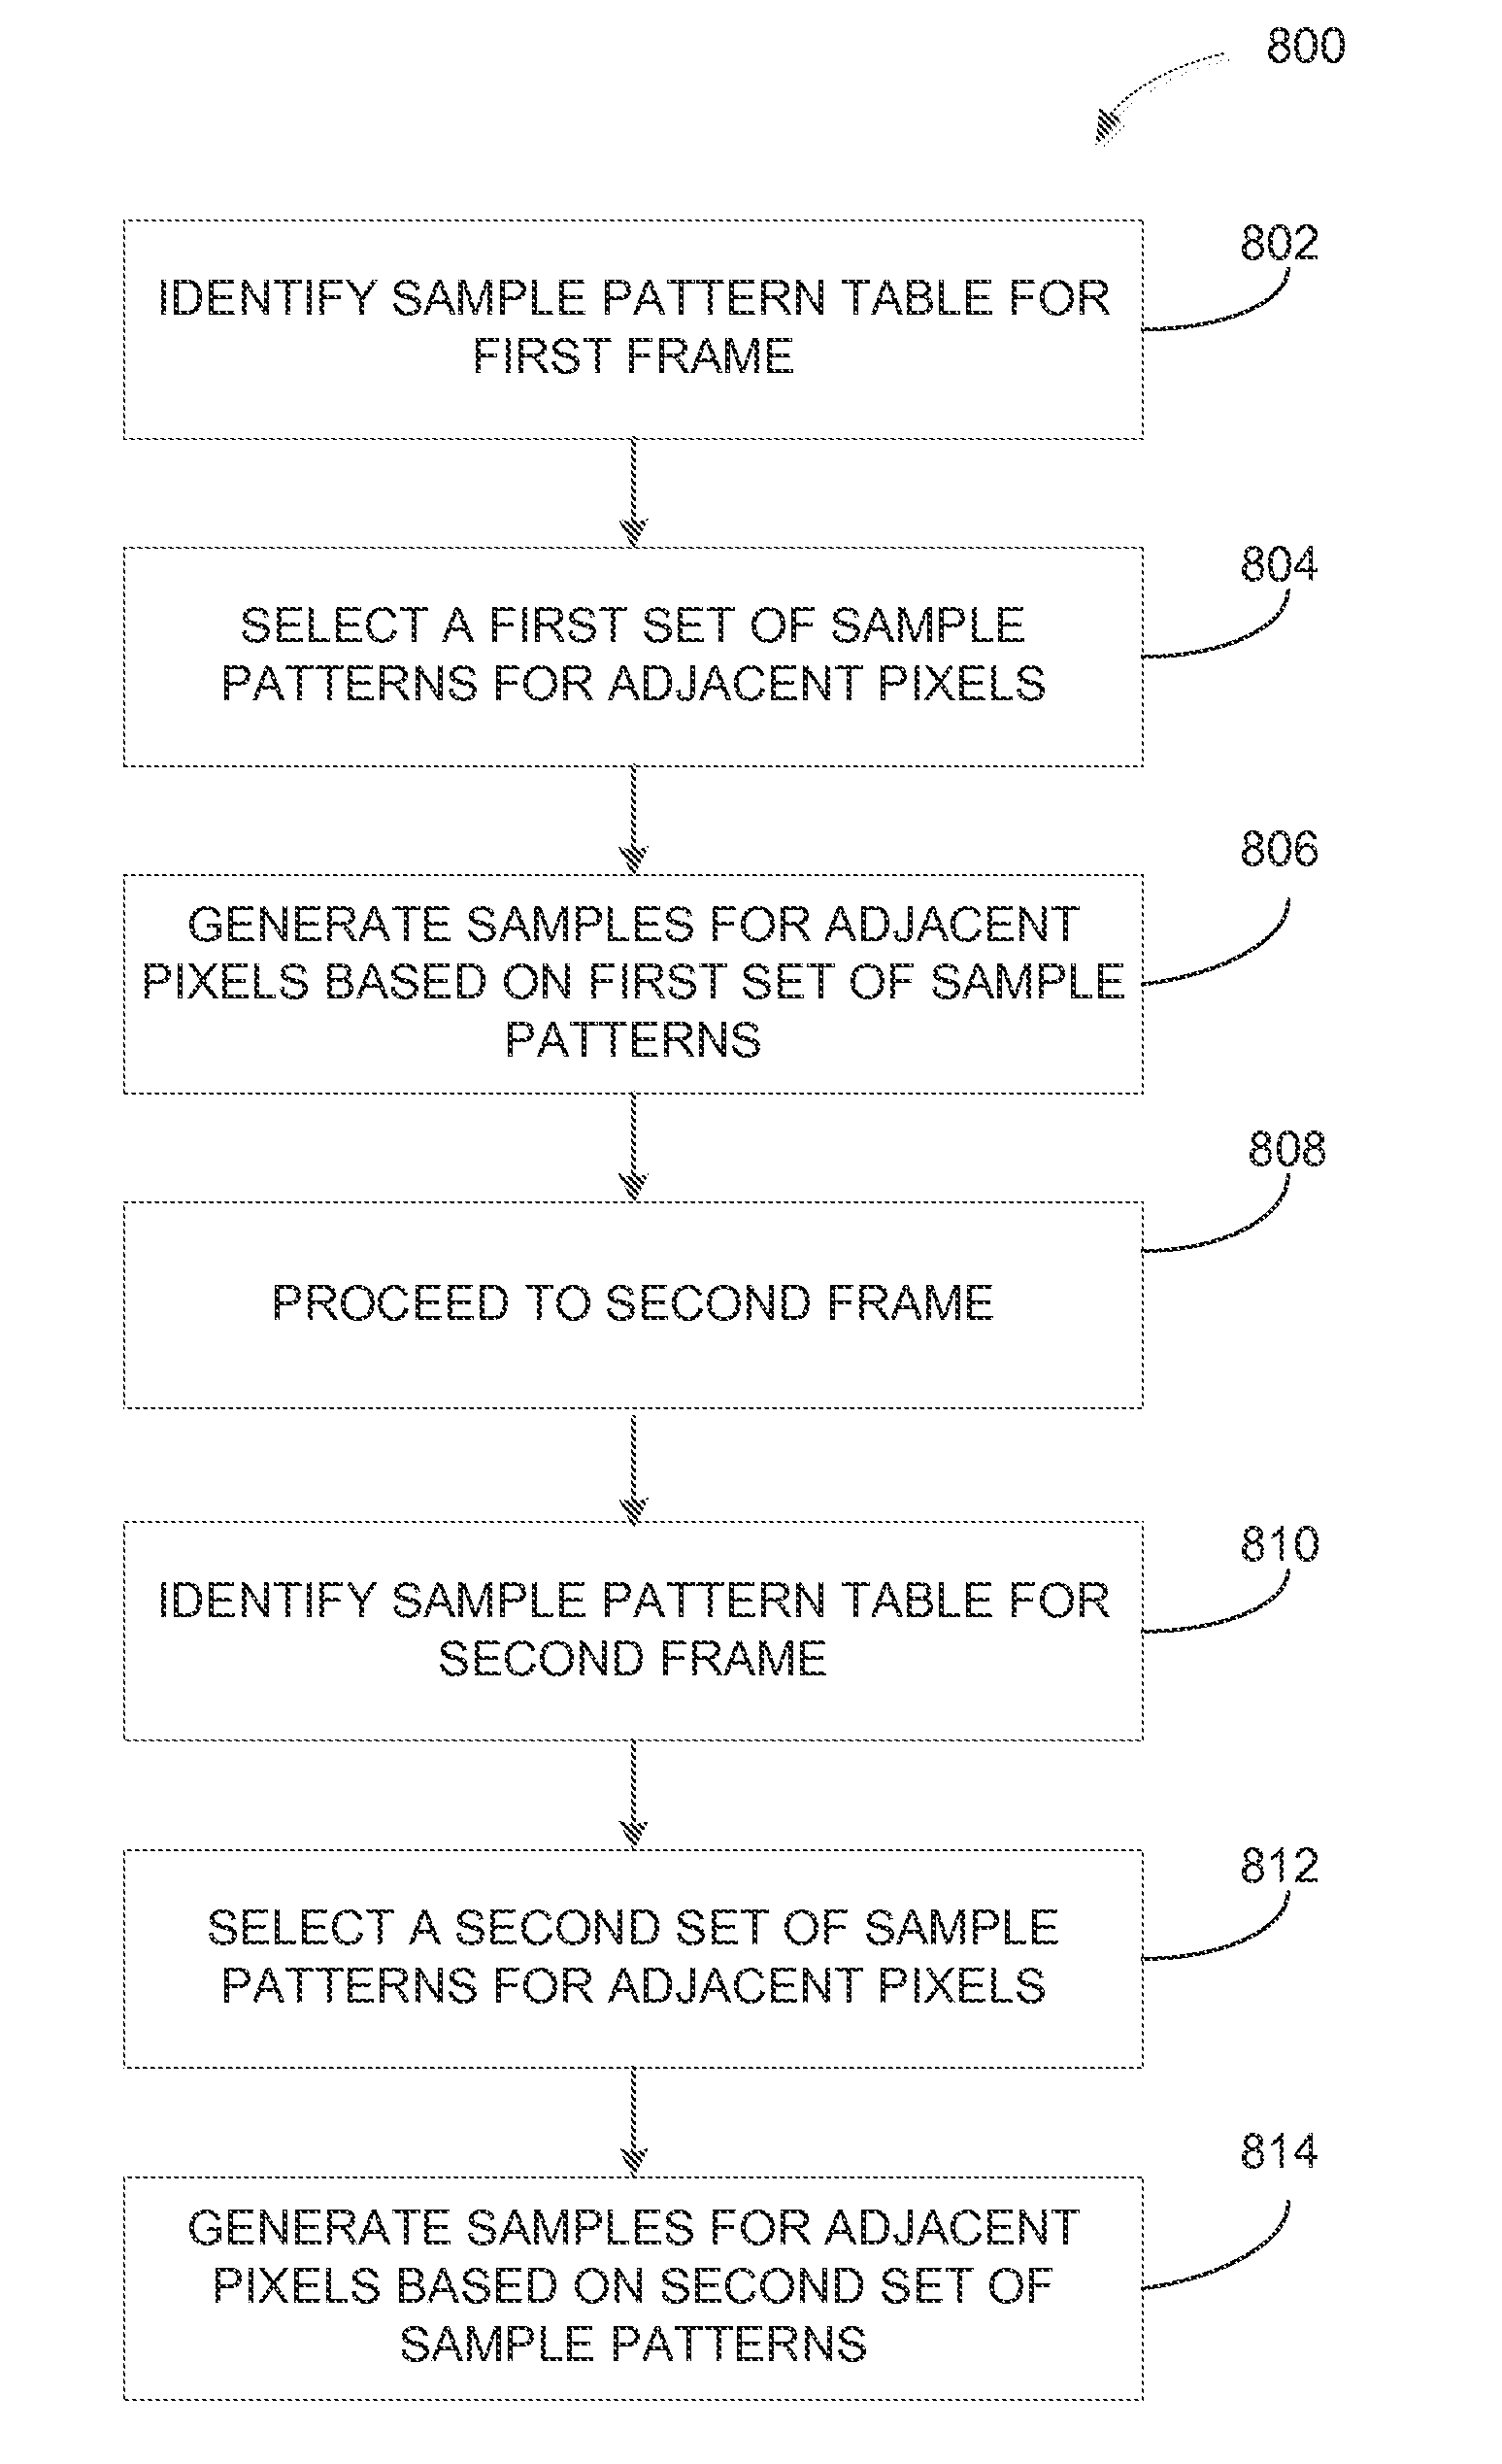 Enhanced Anti-aliasing by varying sample patterns spatially and/or temporally